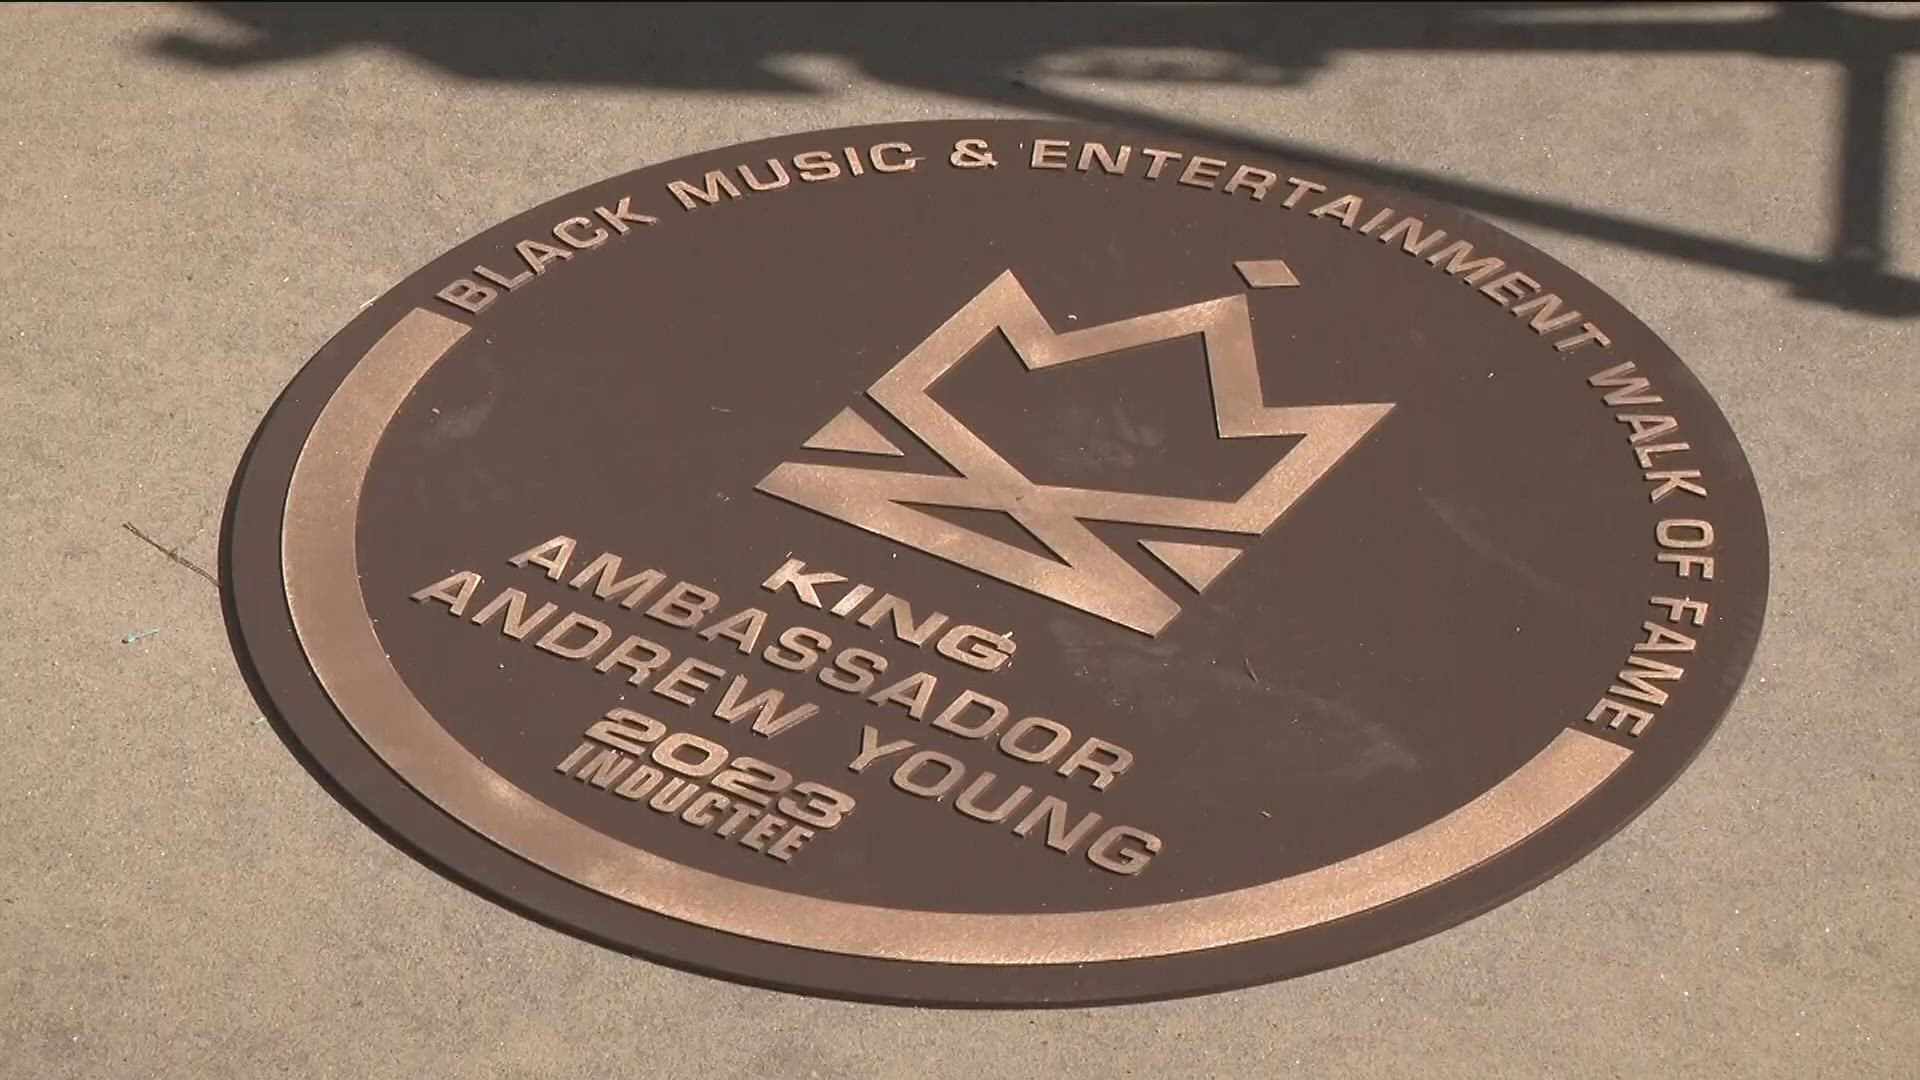 The former Atlanta mayor received a Crown Jewel of Excellence Tuesday at the Black Music & Entertainment Walk of Fame.